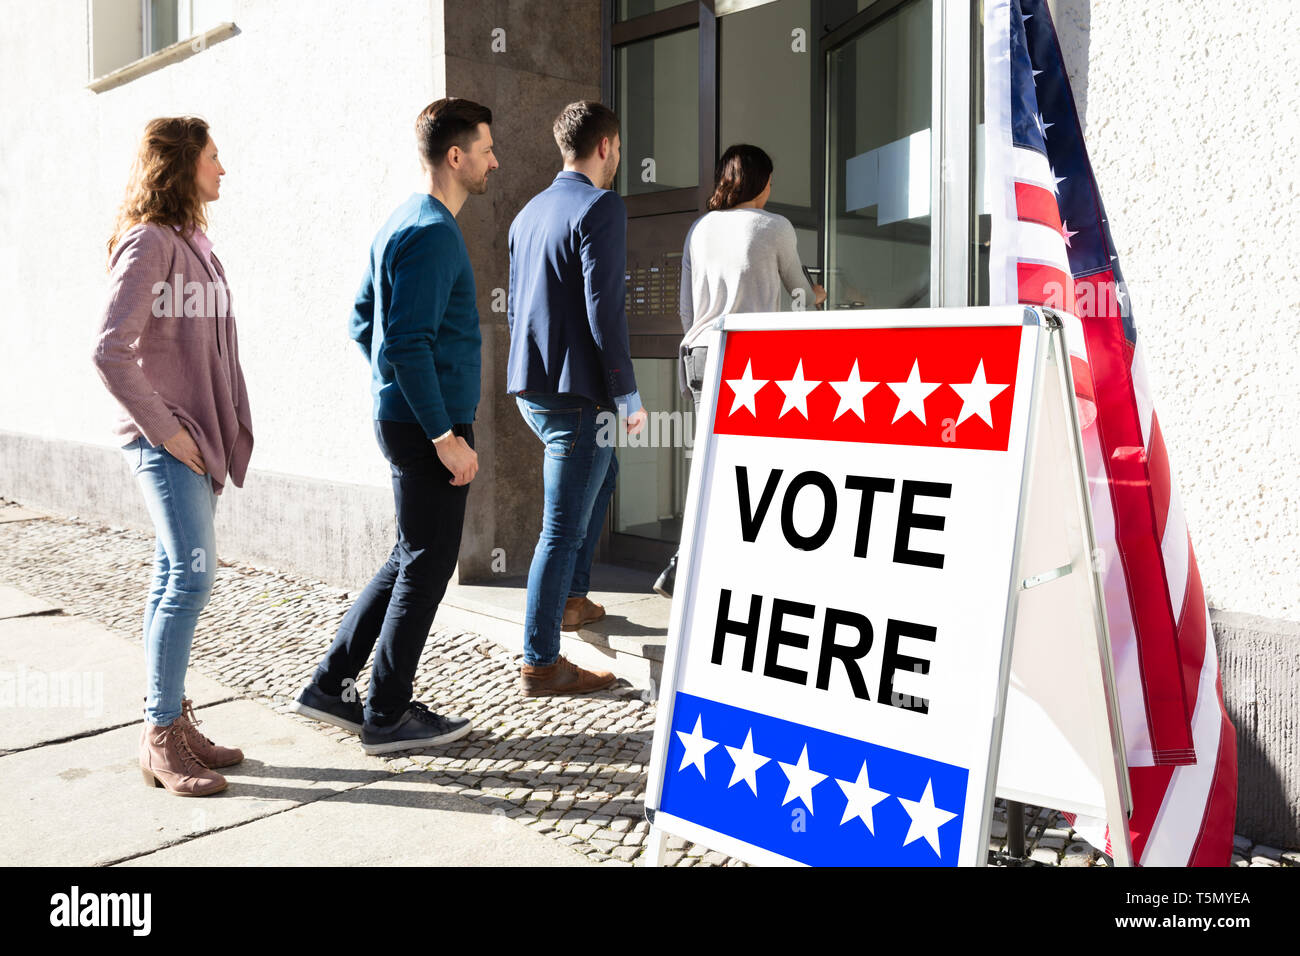 Group Of Young People Standing At The Entrance Of Voting Room Stock Photo